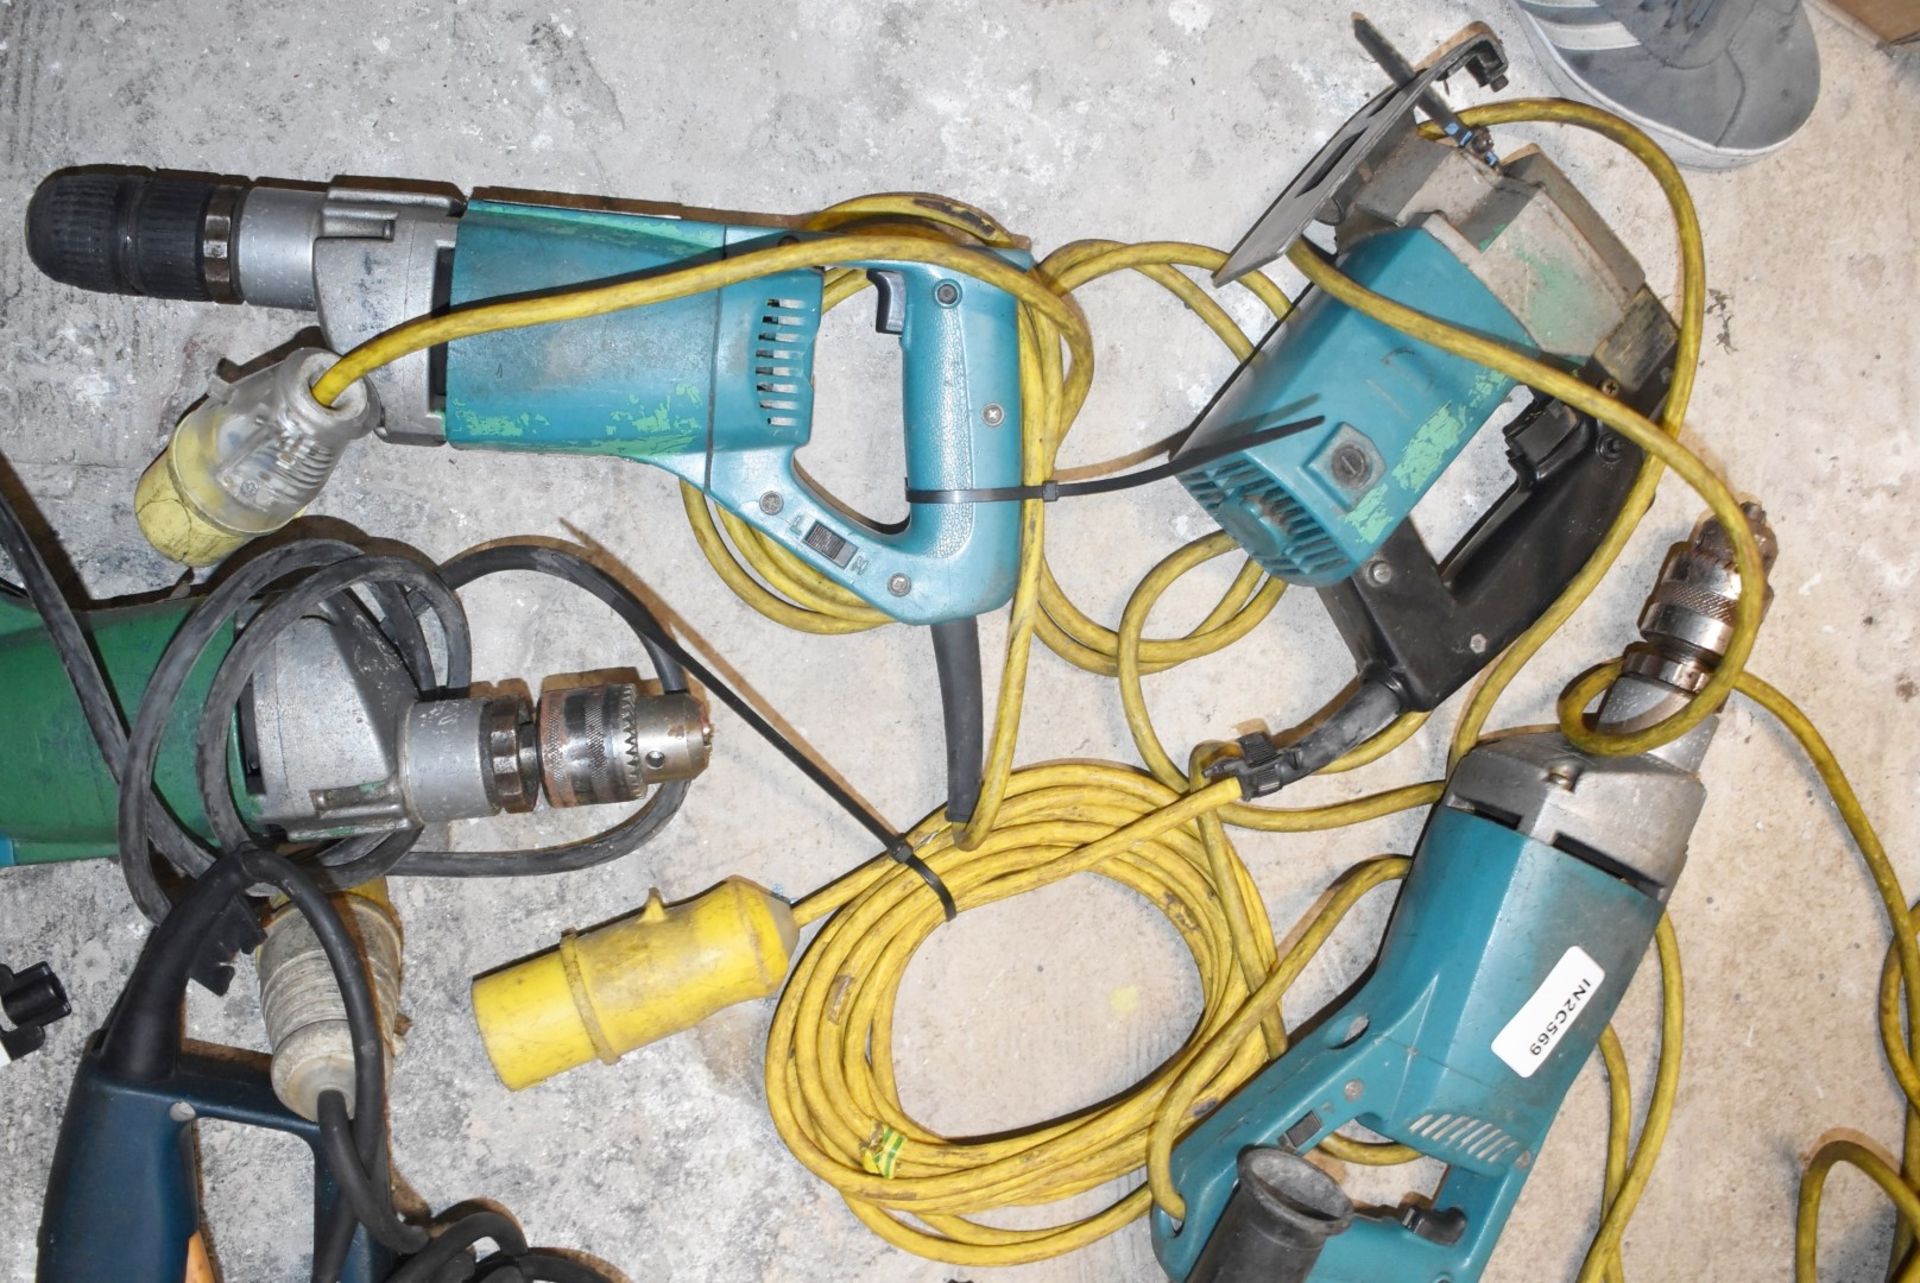 5 x Industrial 110v Power Tools Including Various Drills - Image 4 of 6